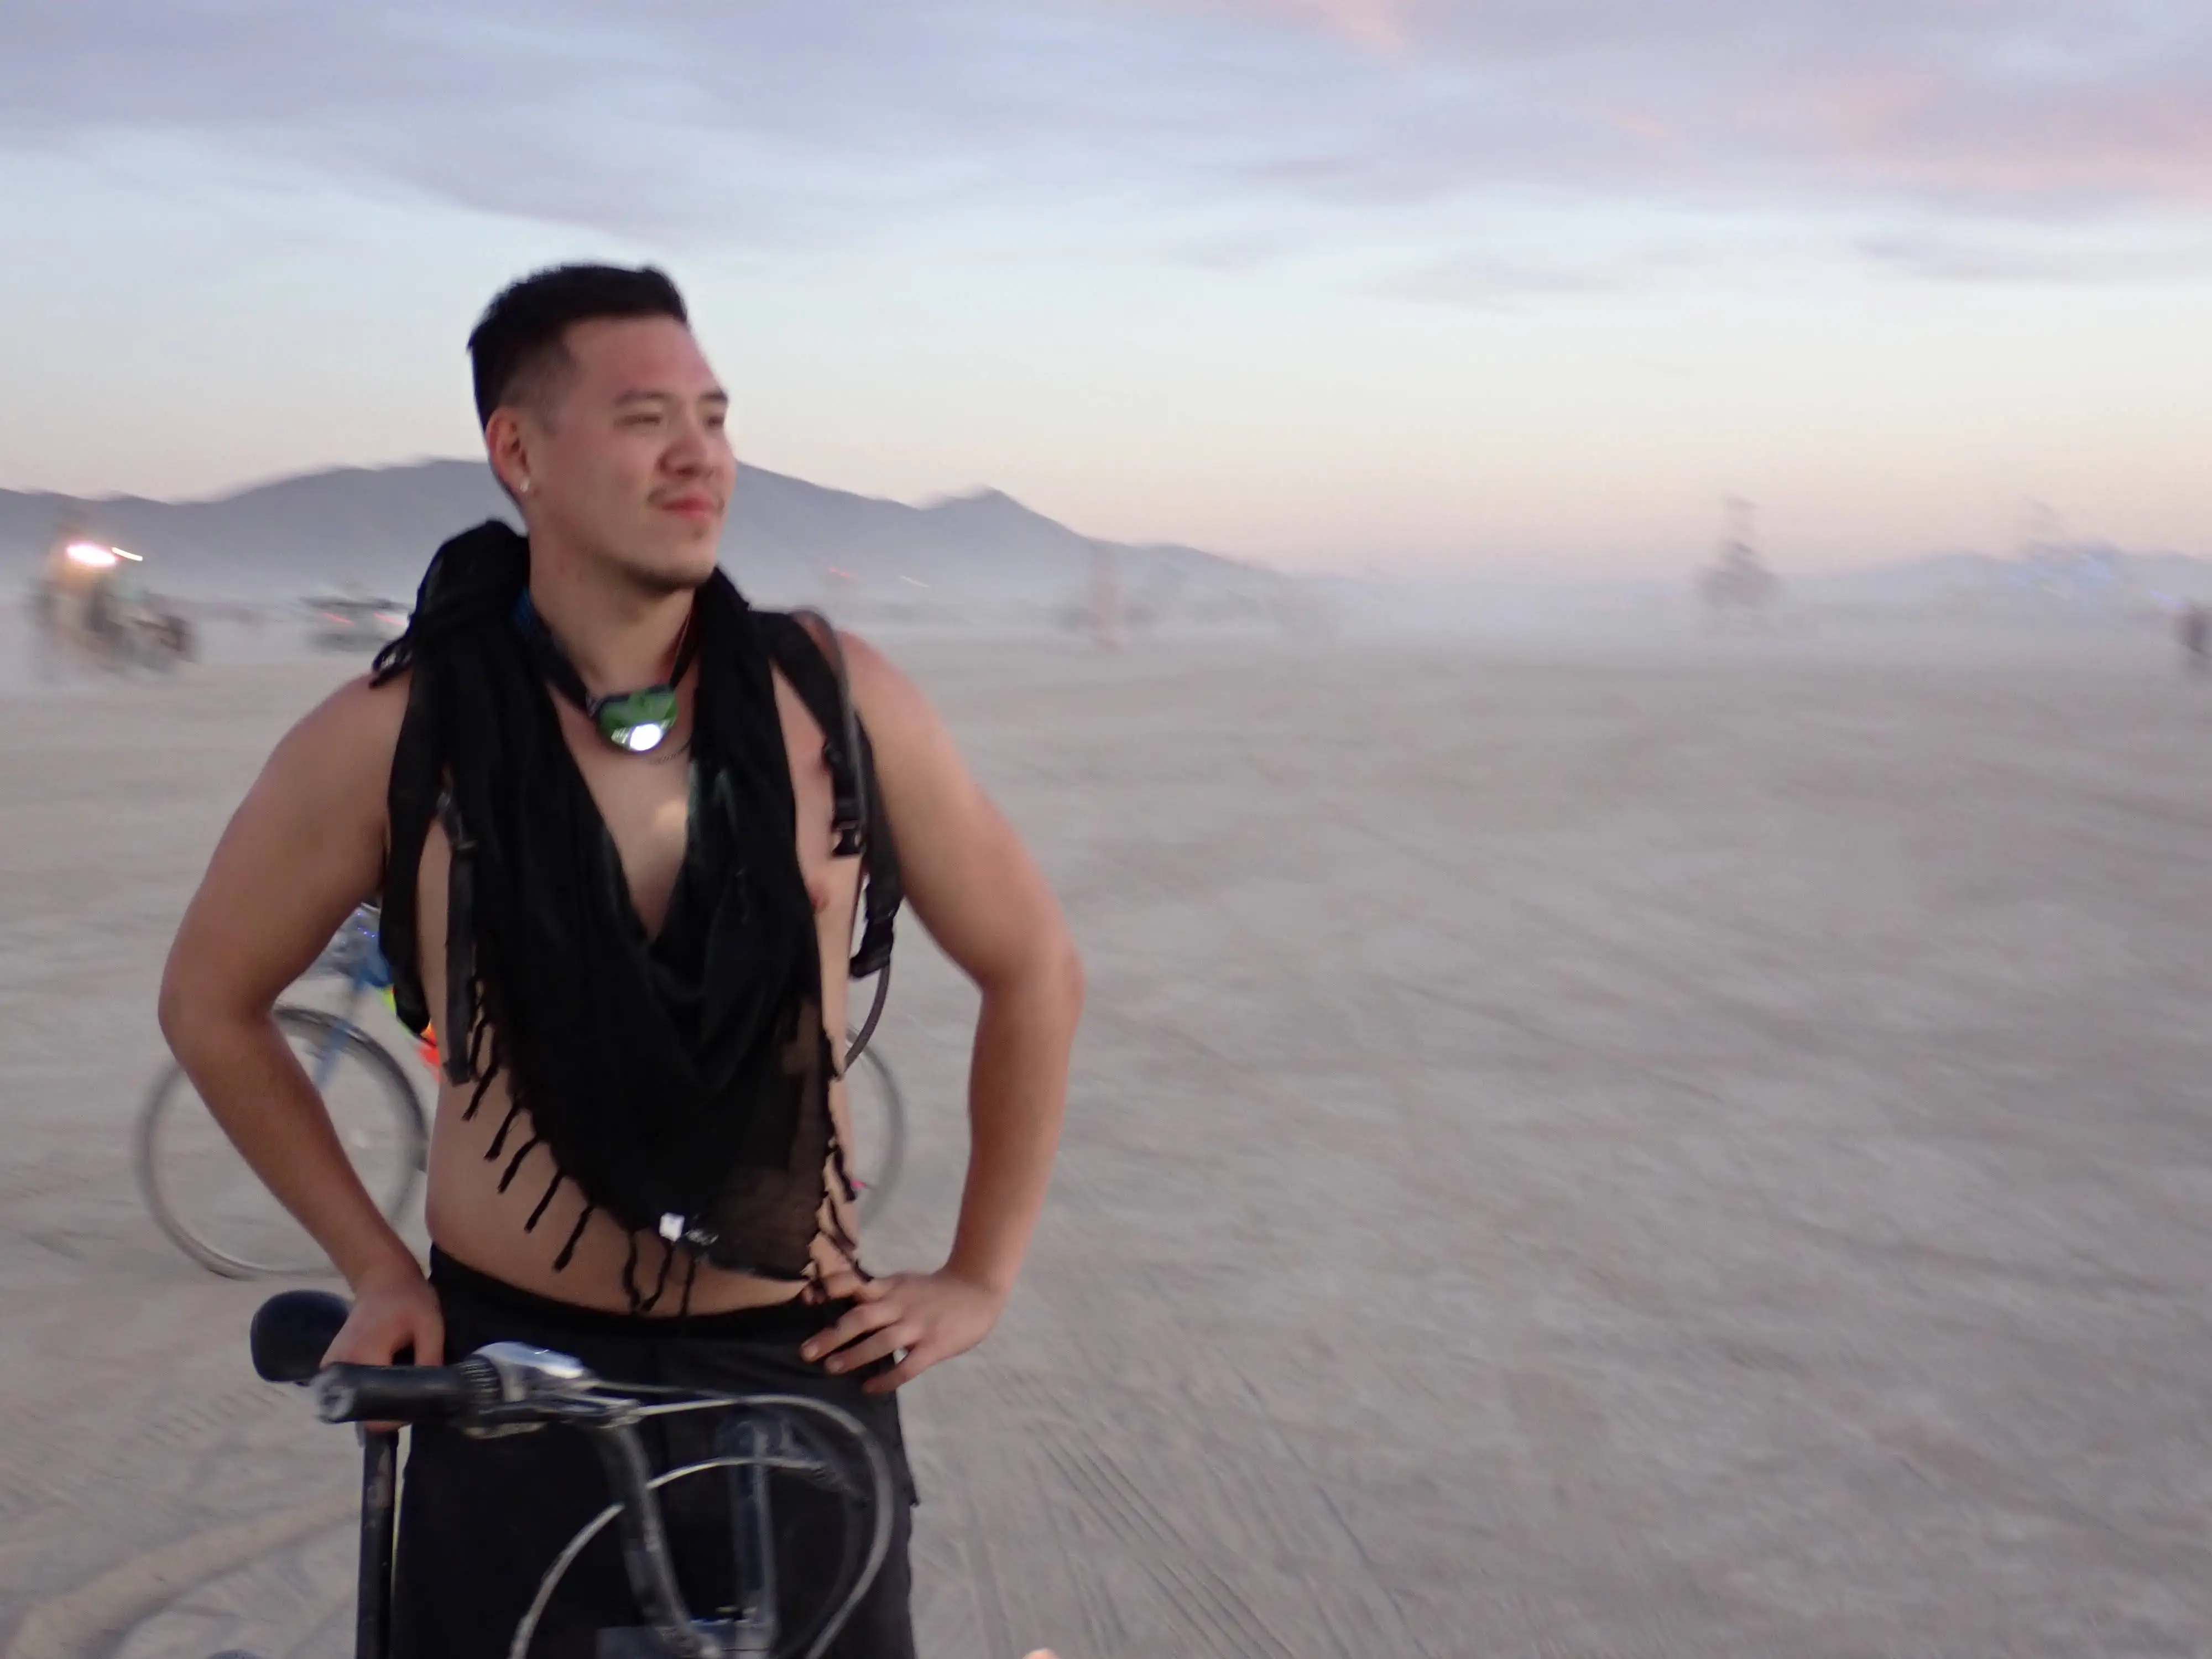 A muscular man rests on his bicycle at dawn at Burning Man. The dust makes it hard to see the background but you can make out the mountains and some mutant vehicles. He is wearing a large black scarf, no shirt, black pants, and a headlamp around his neck.